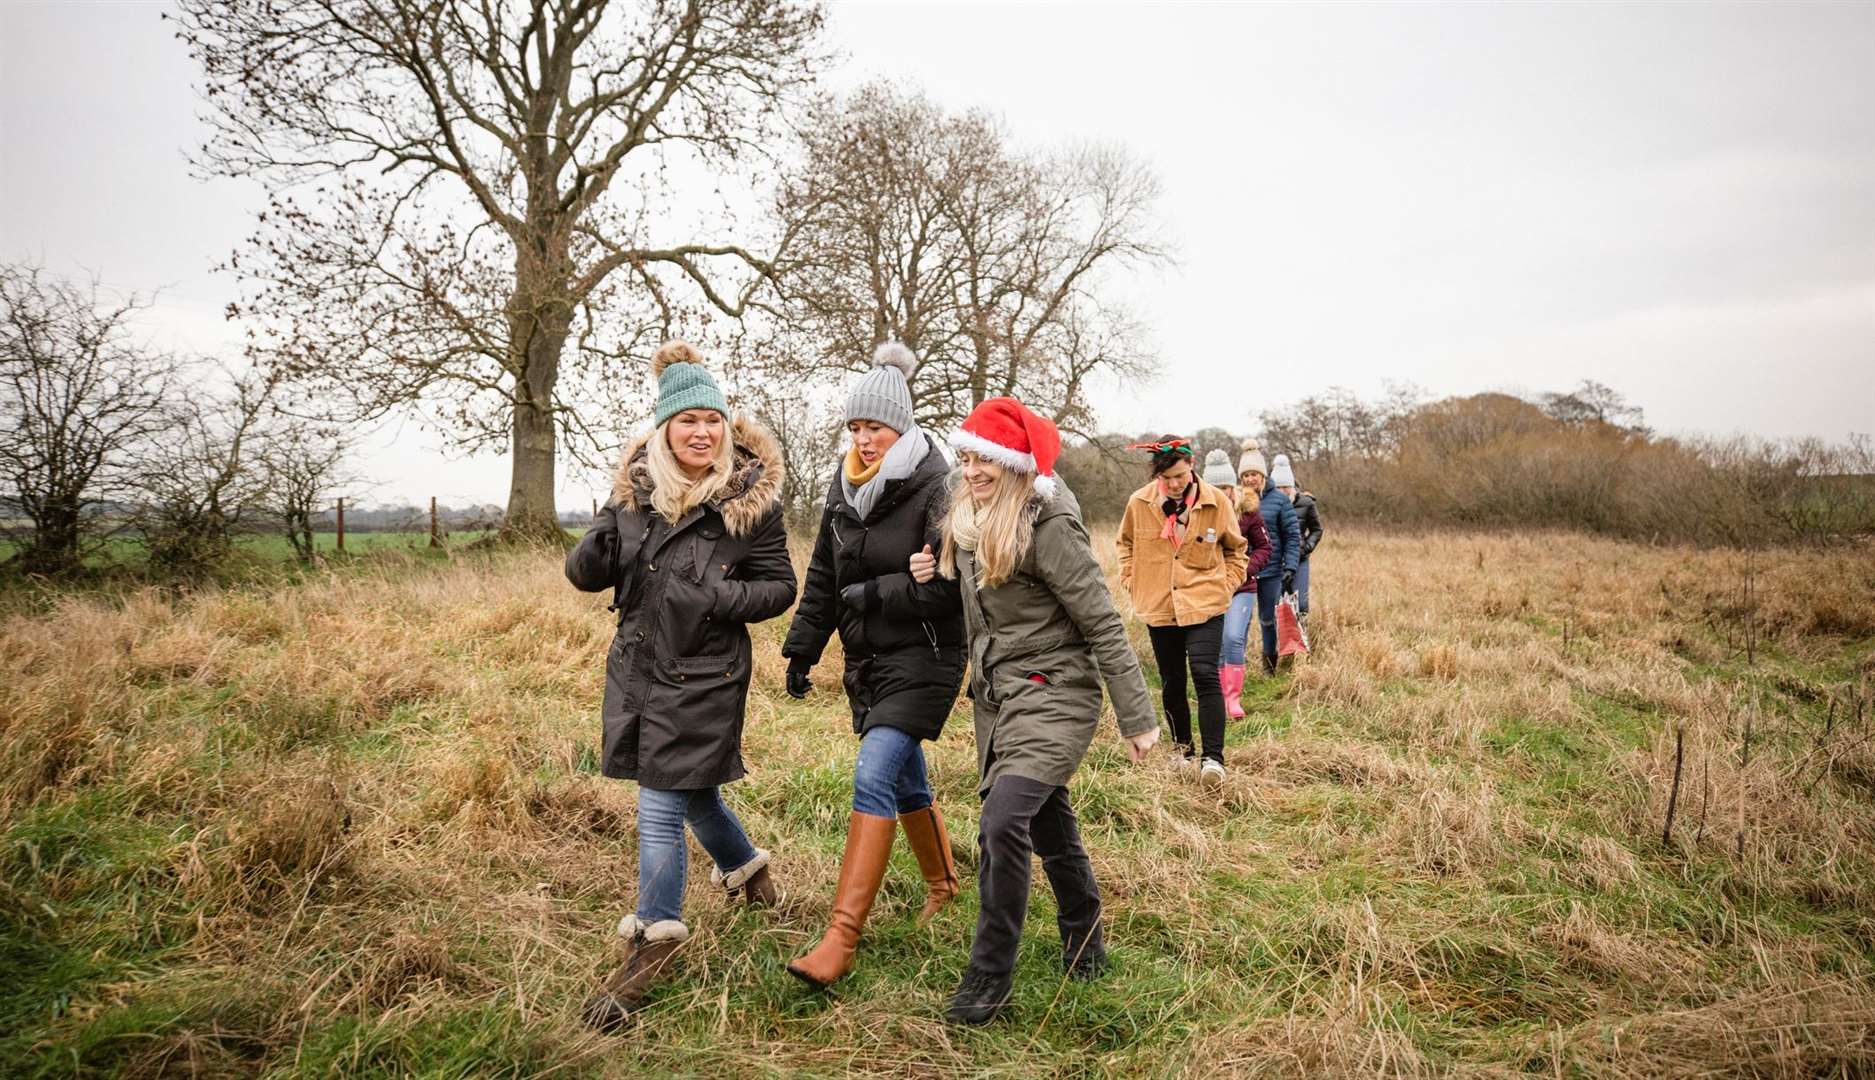 Wrap up warm and head out on a bracing winter walk this January. Picture: iStock